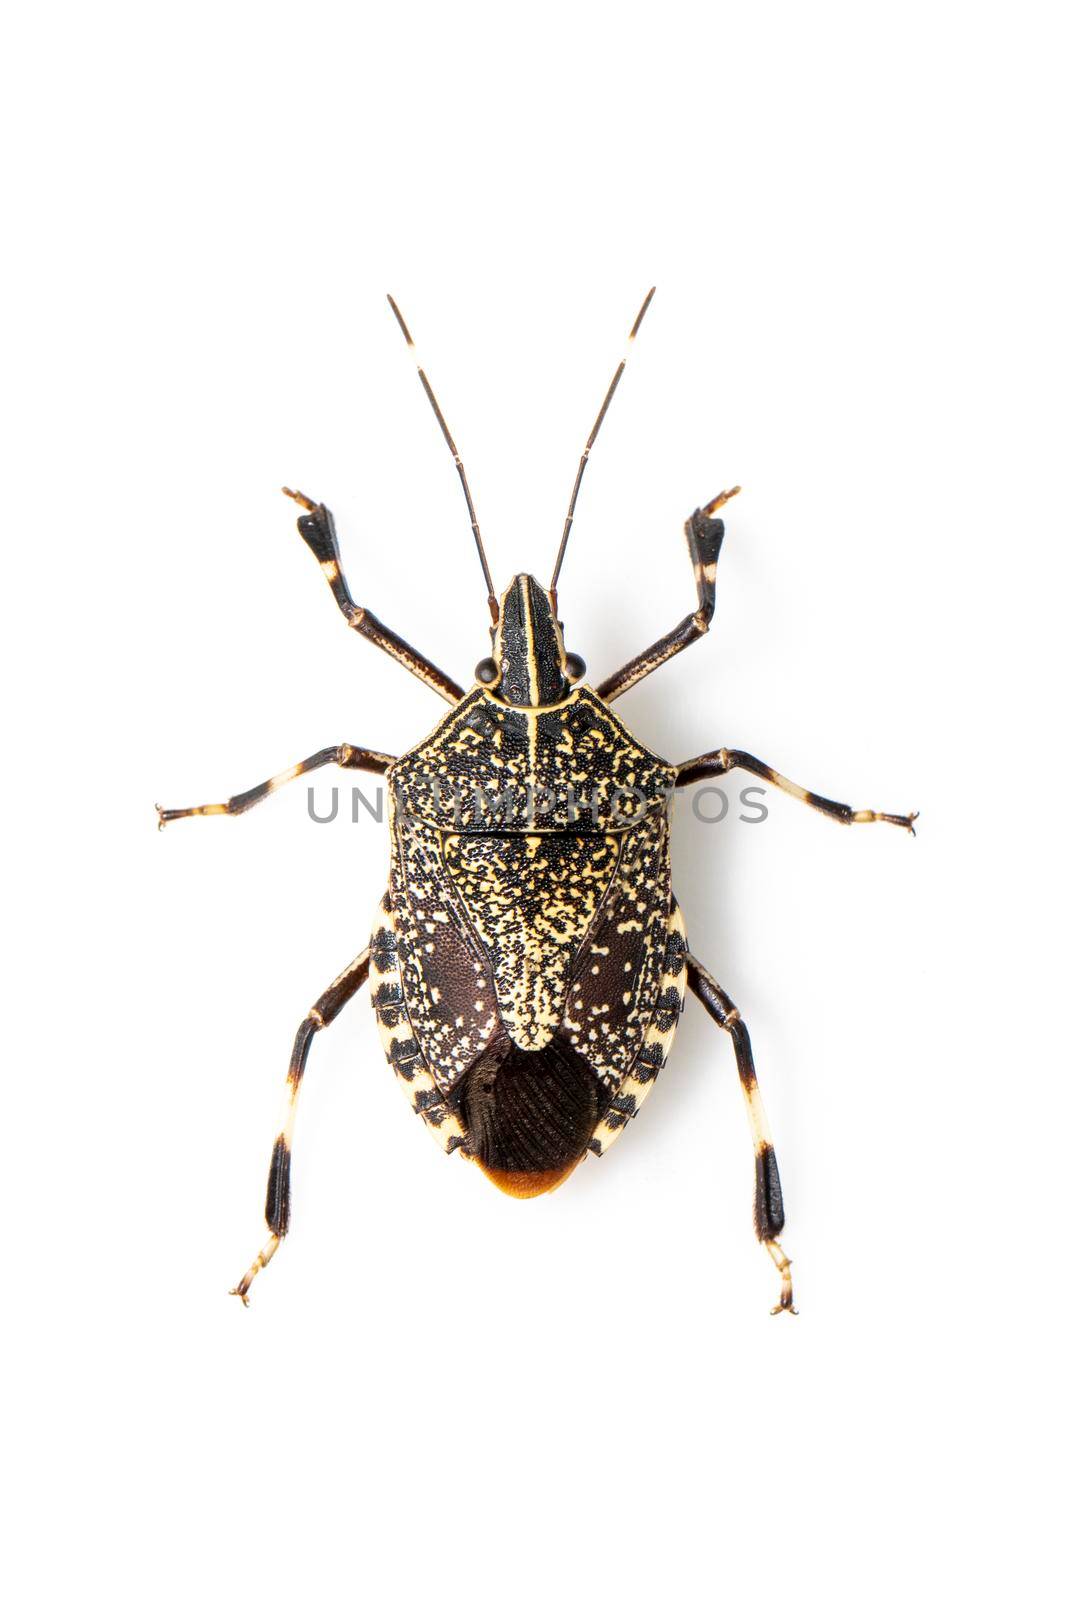 Image of yellow spotted stink bug isolated on white background. Animal. Insect. by yod67